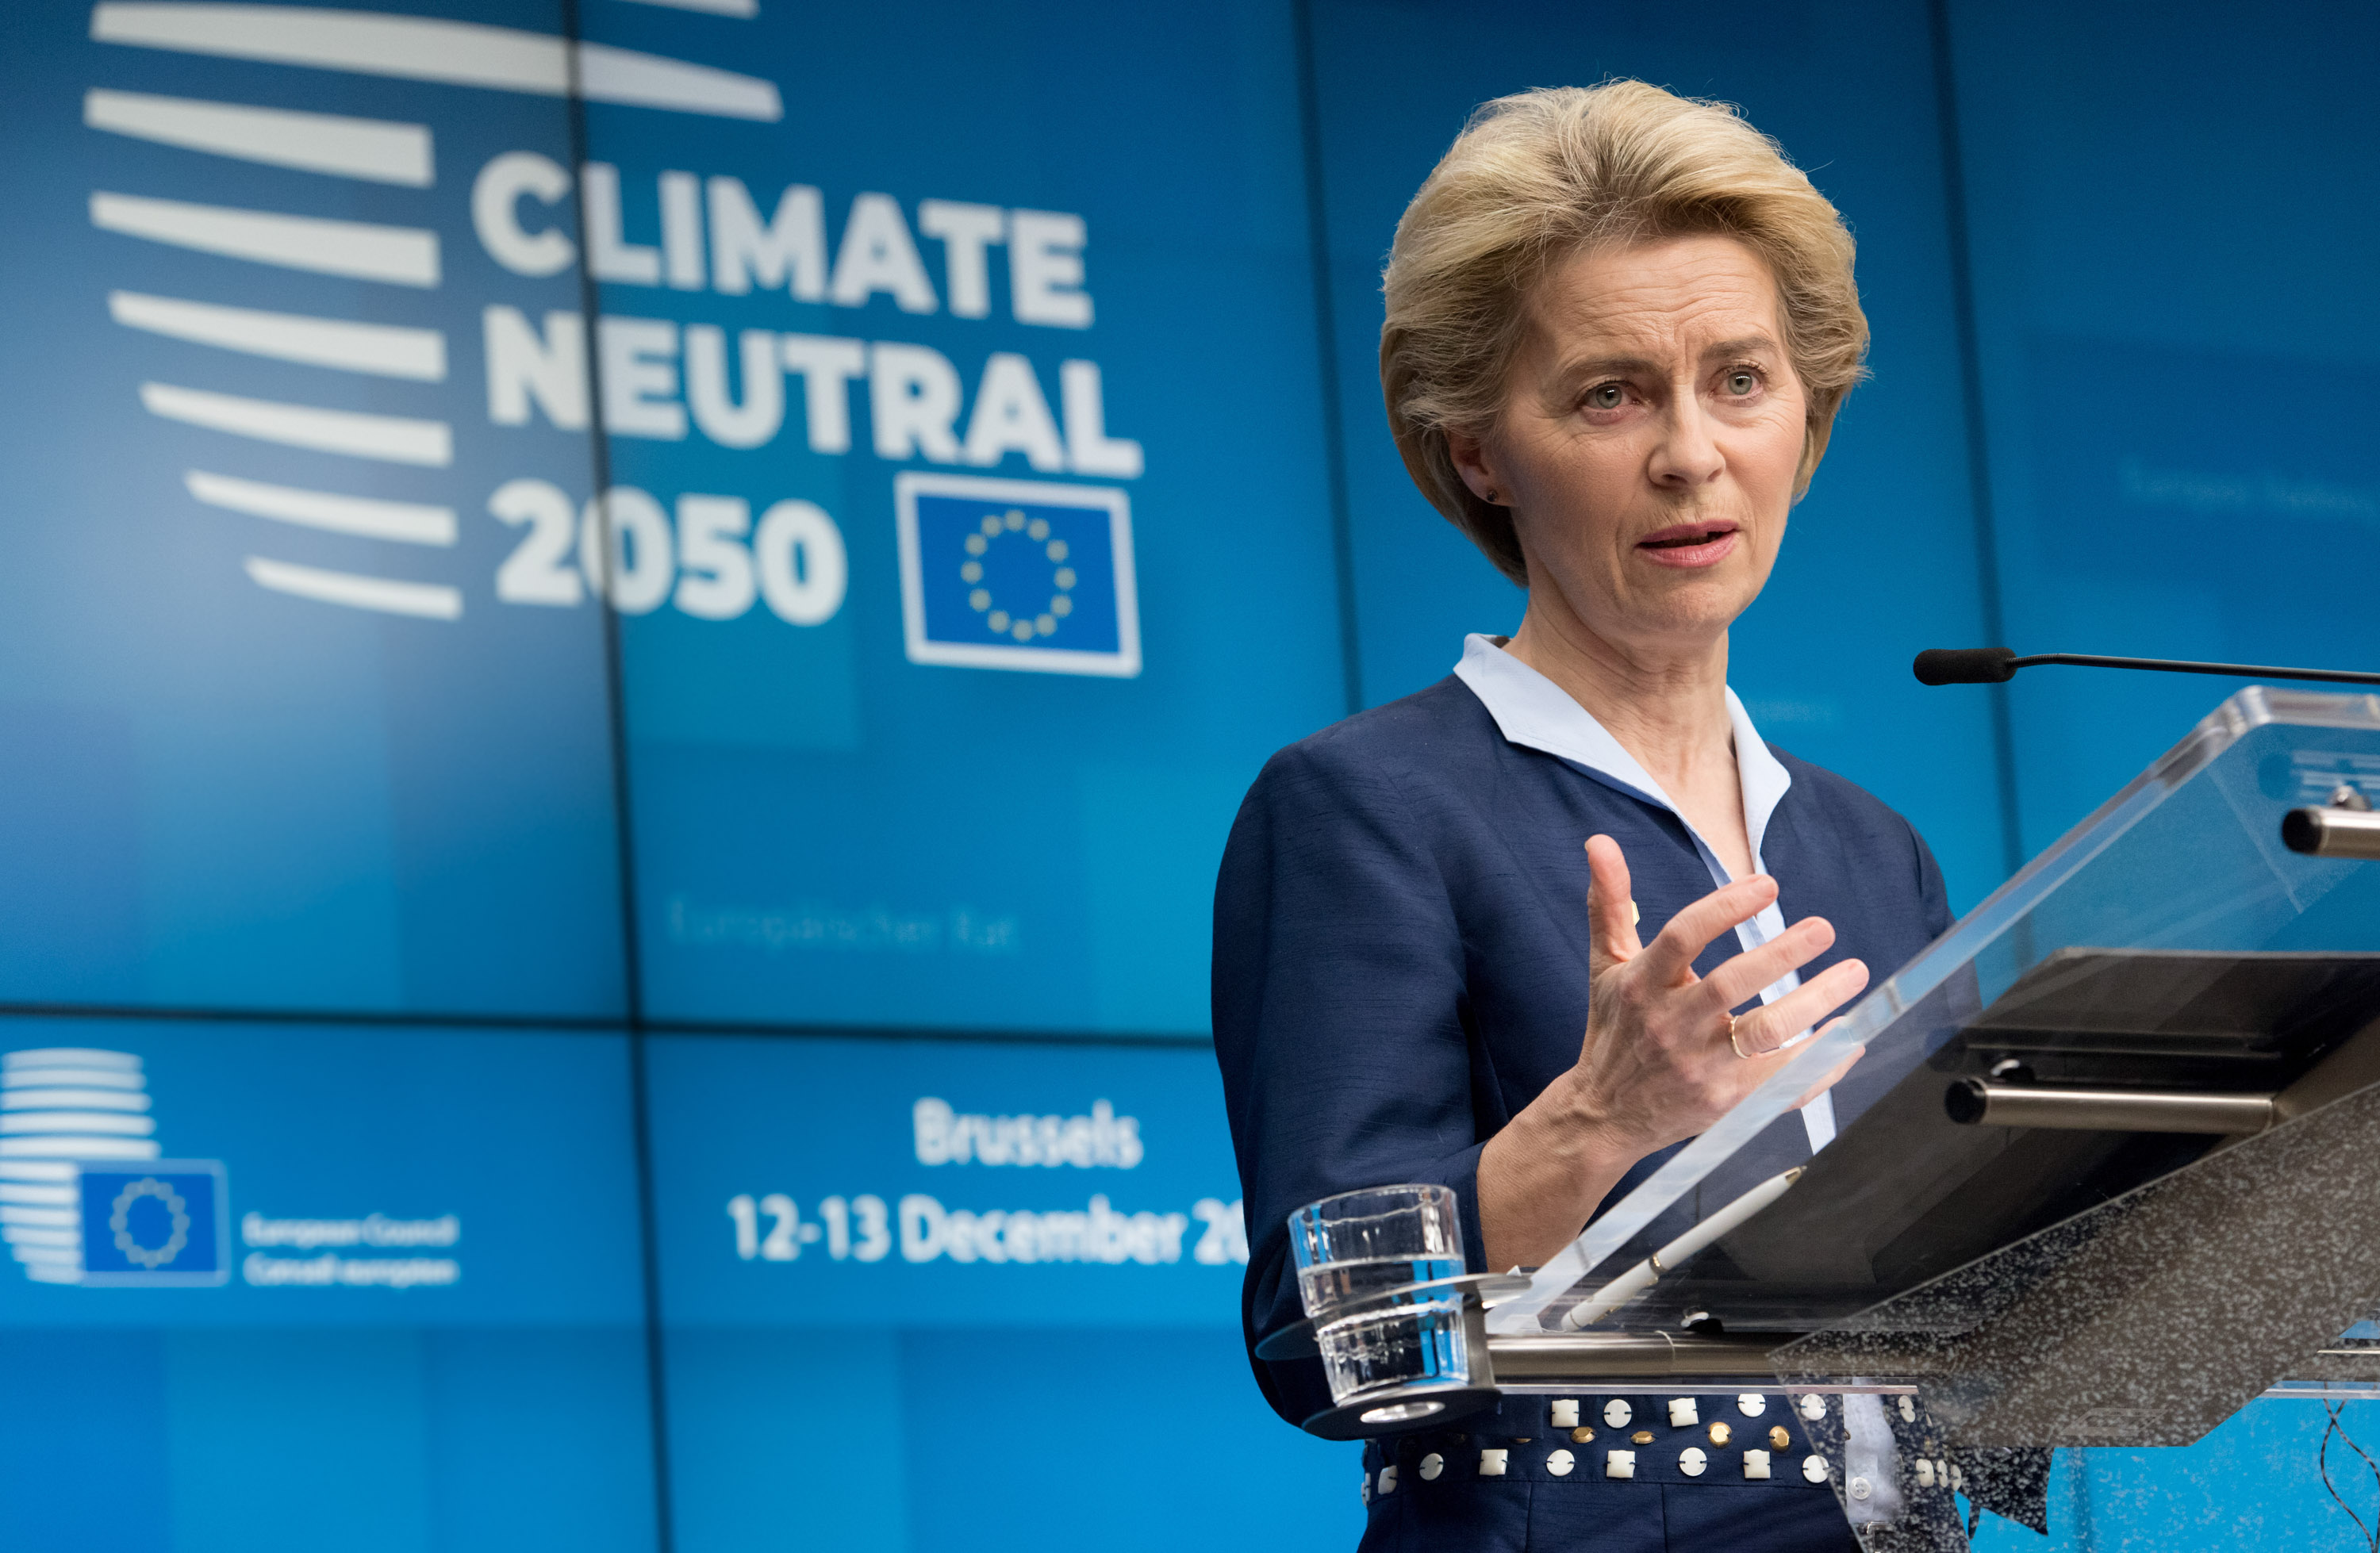 Europe has unveiled a plan to eliminate climate emissions by 2050 | MIT